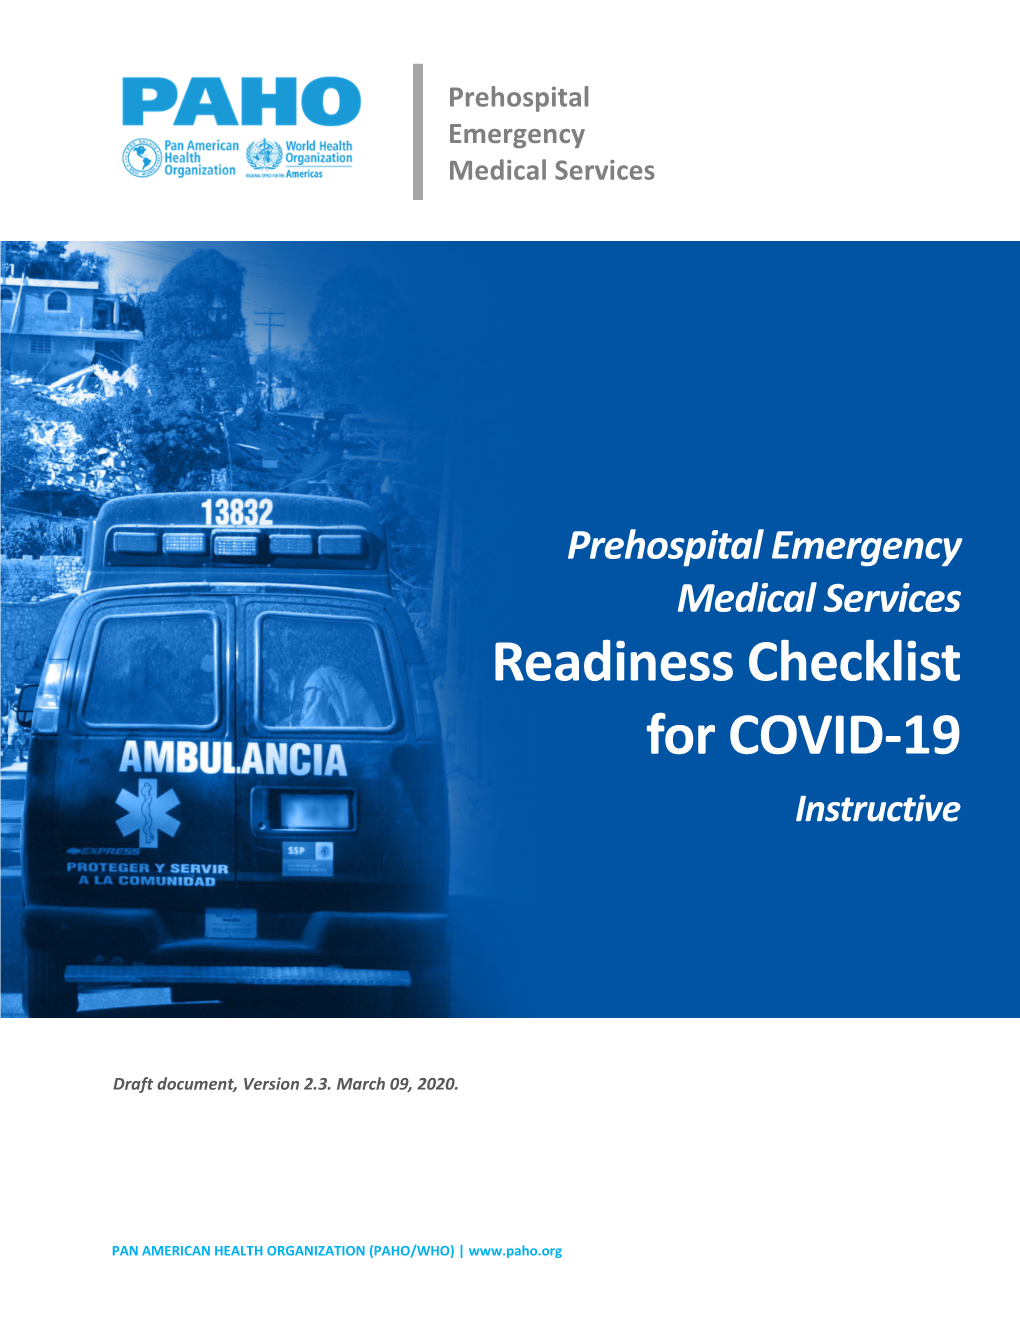 Prehospital Emergency Medical Services Readiness Checklist for COVID-19 Instructive